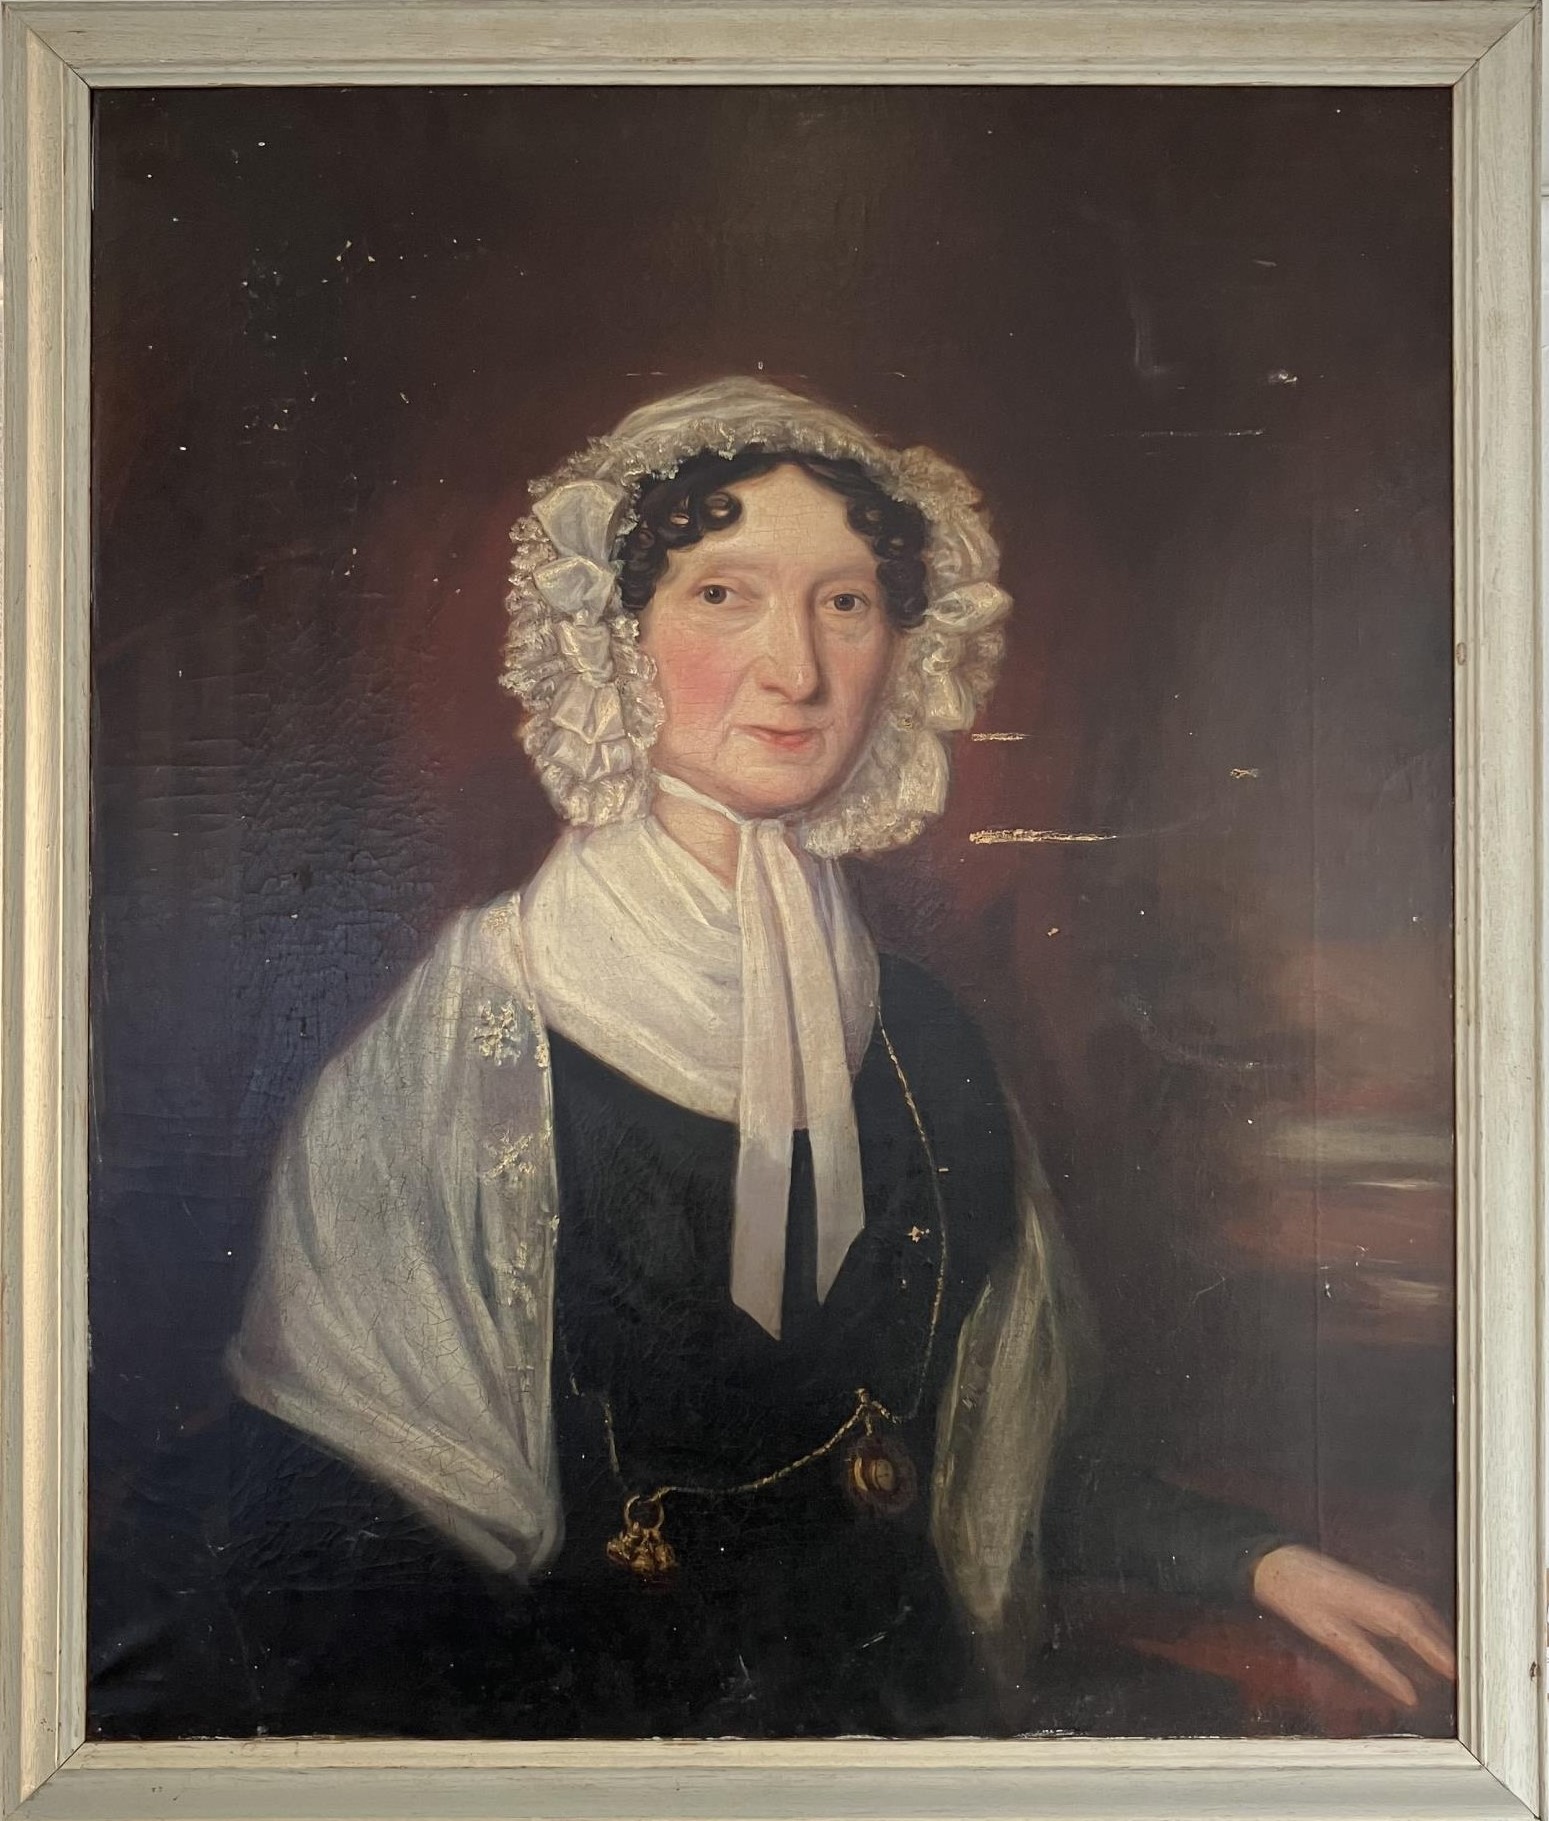 19th century, English school, portrait of an lady, oil on canvas, 75 x 62 cm Condition poor, see